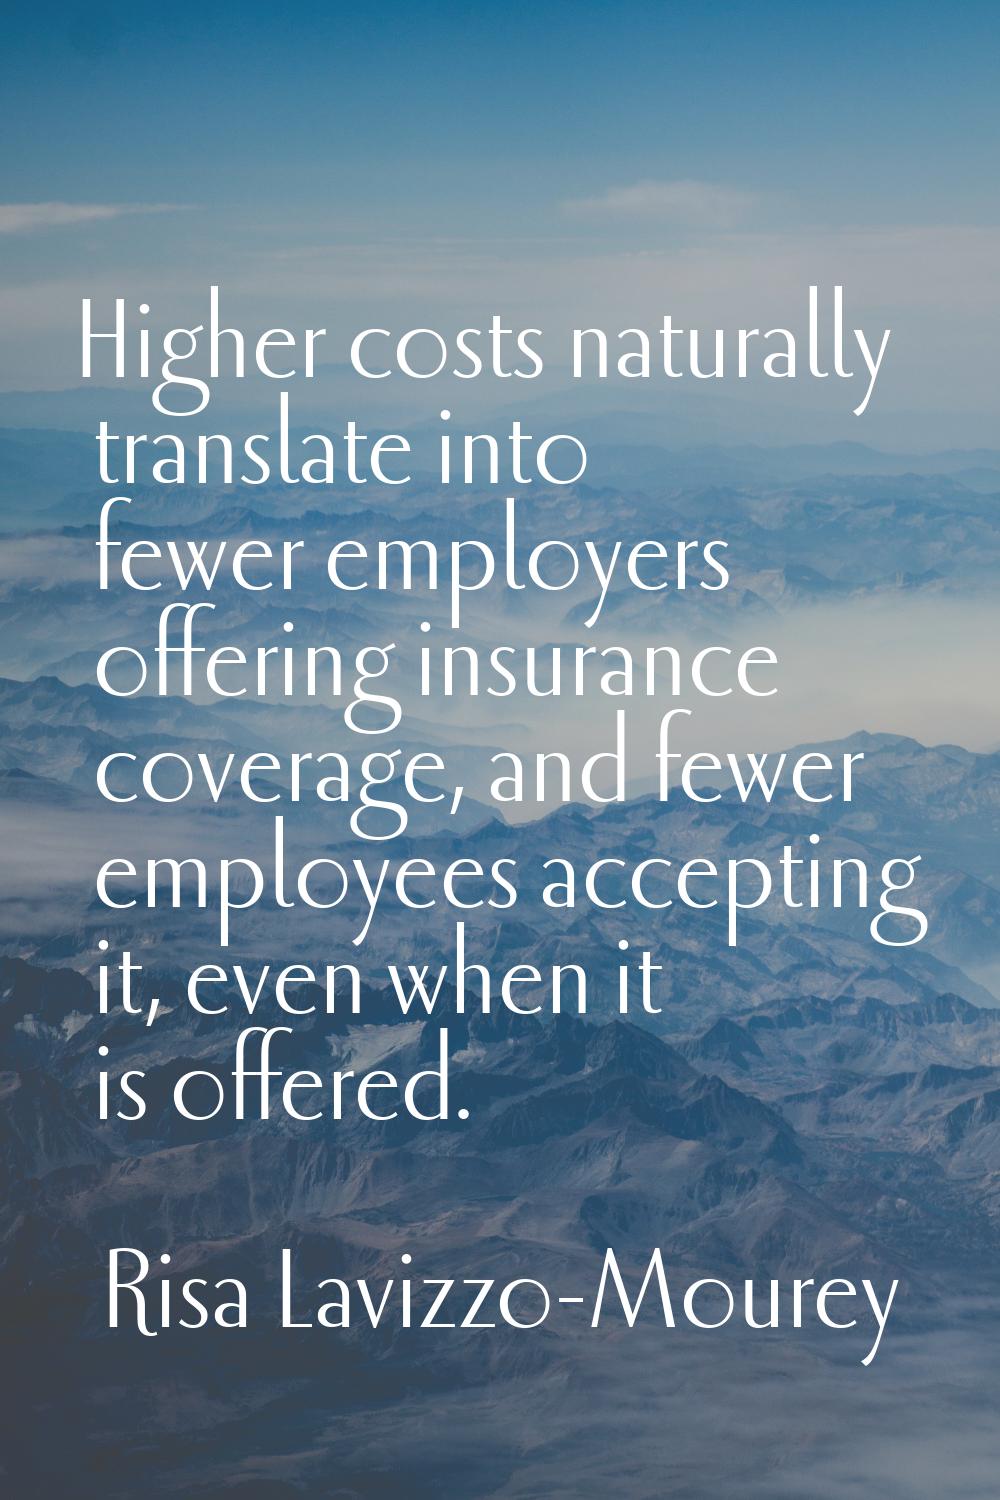 Higher costs naturally translate into fewer employers offering insurance coverage, and fewer employ